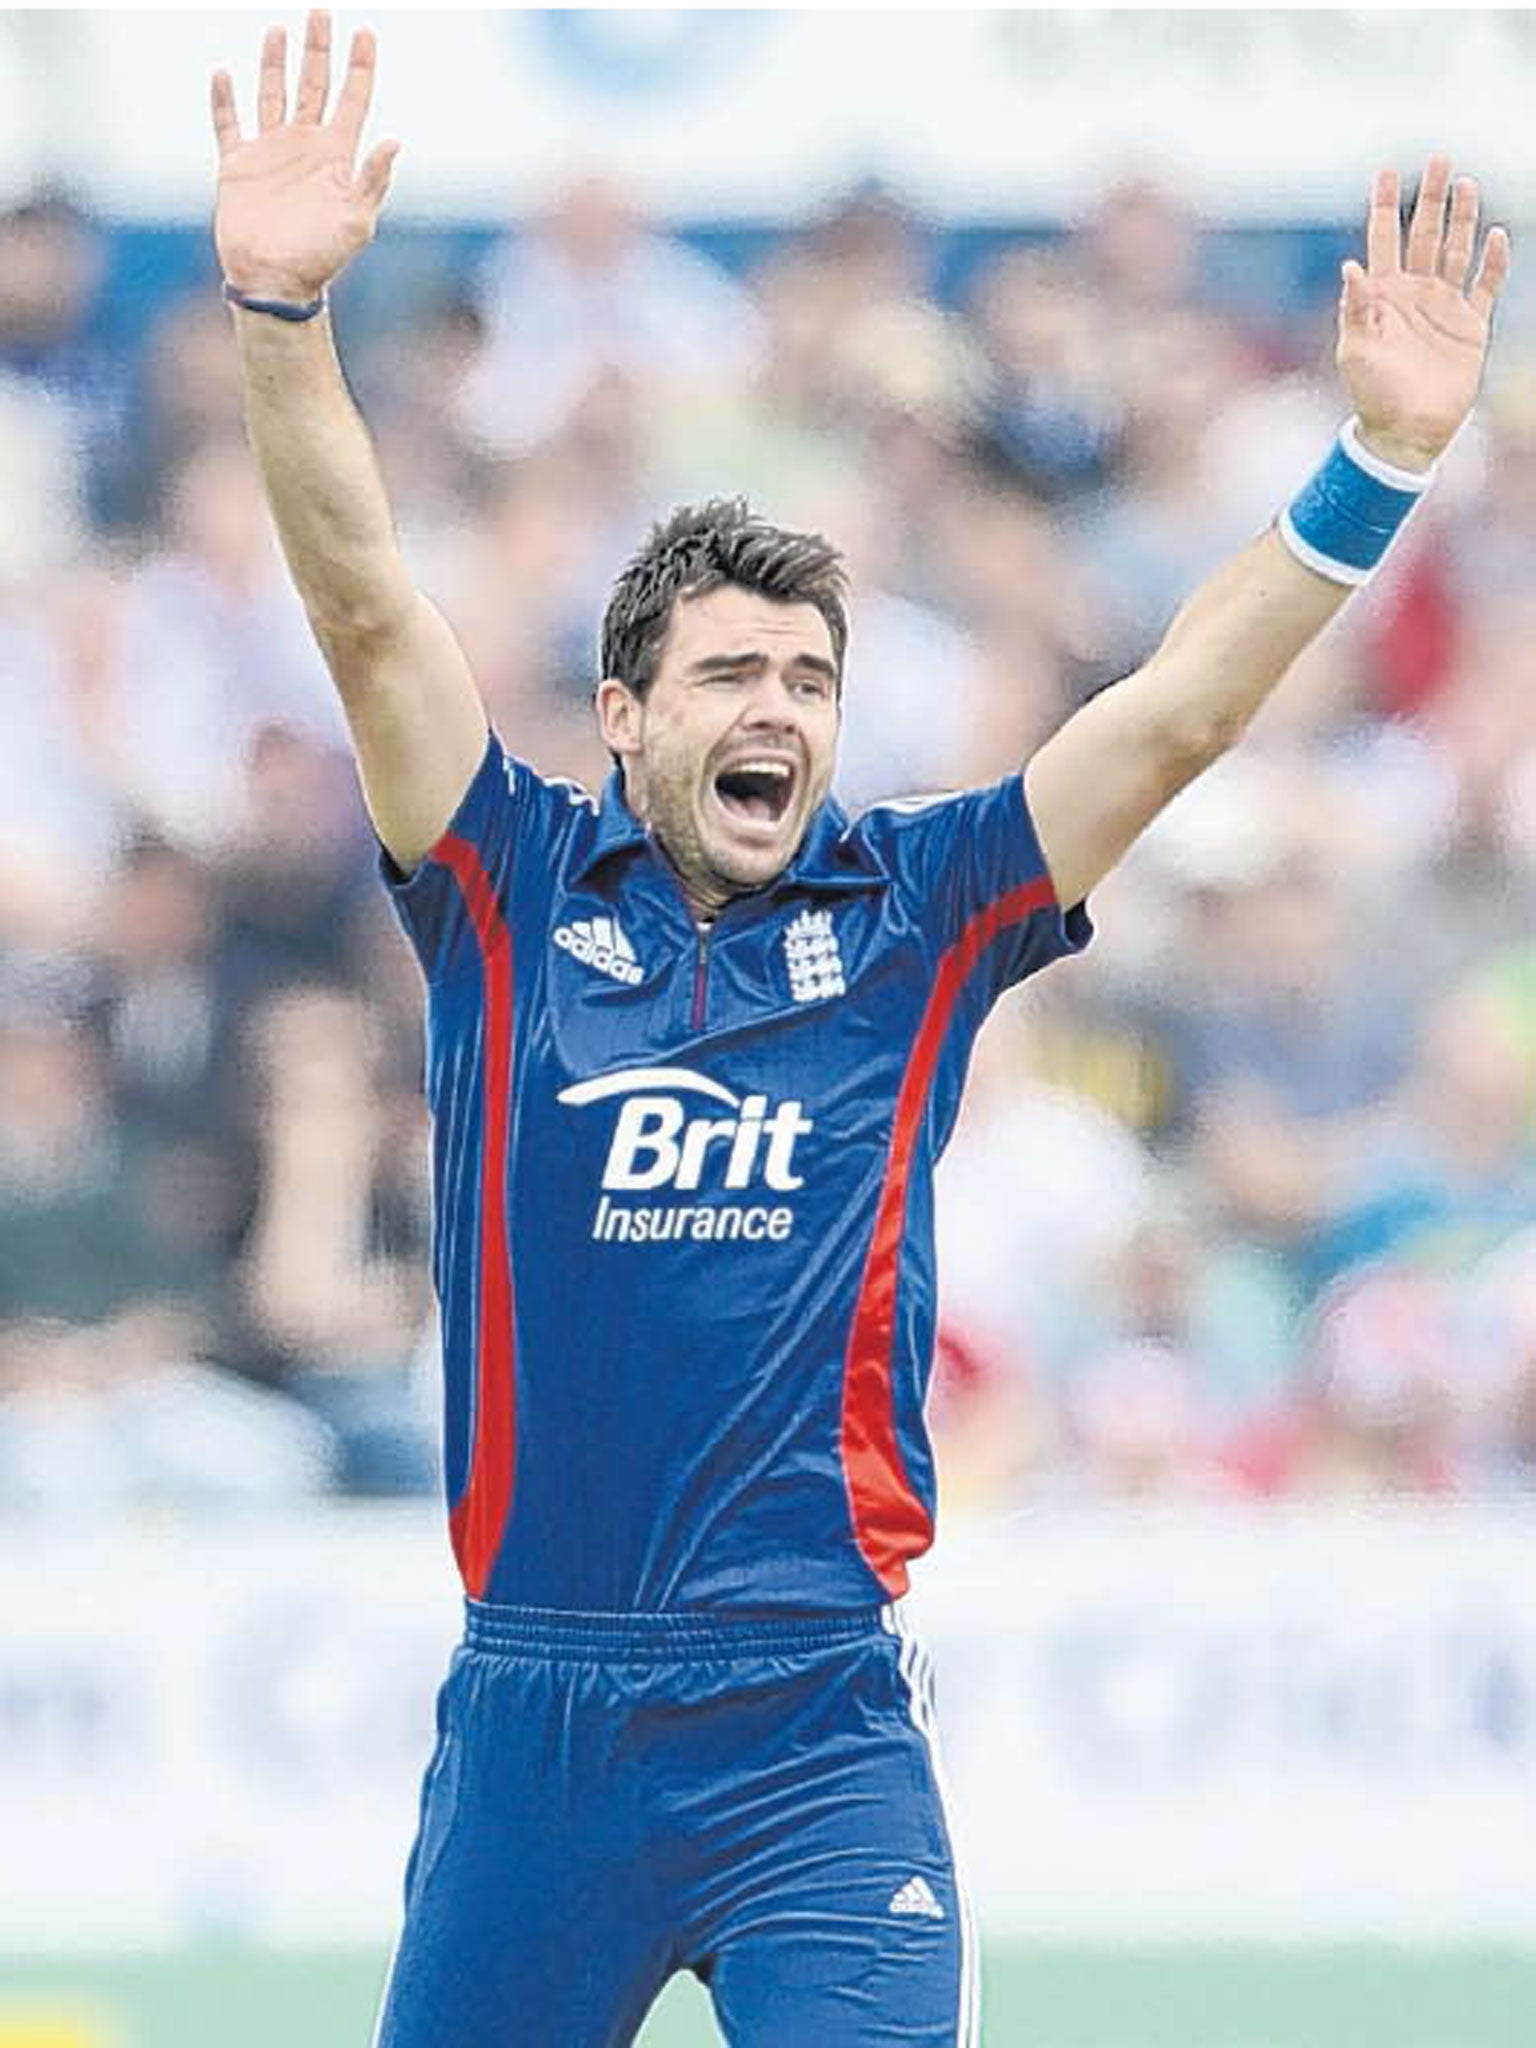 Jimmy Anderson now has 529 wickets in all formats